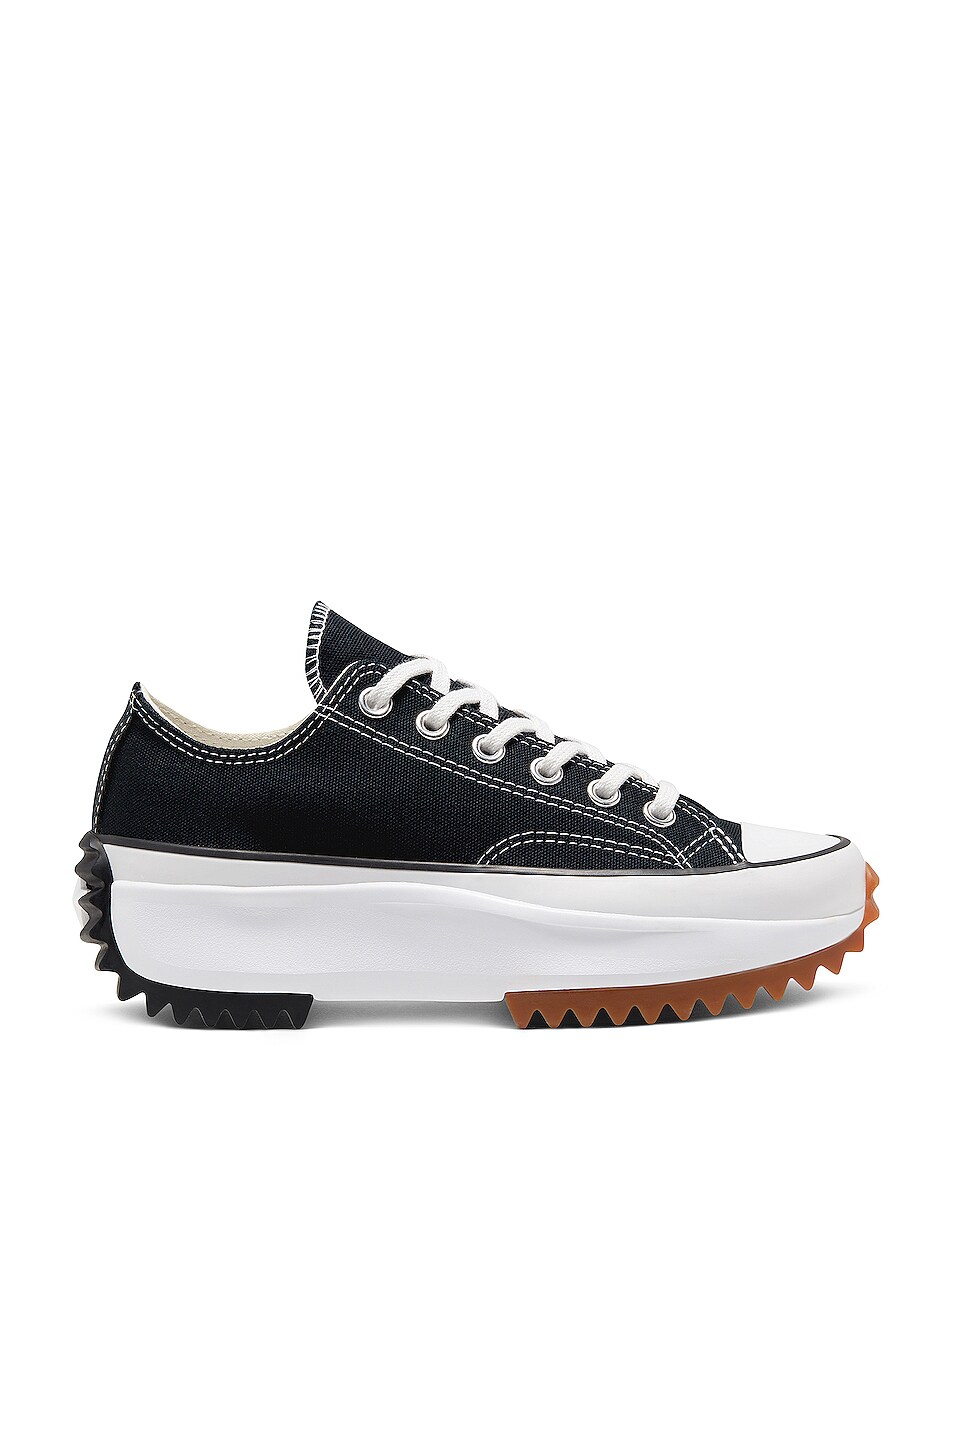 Image 1 of Converse Run Star Hike Canvas Platform Low Tops in Black, White, & Gum